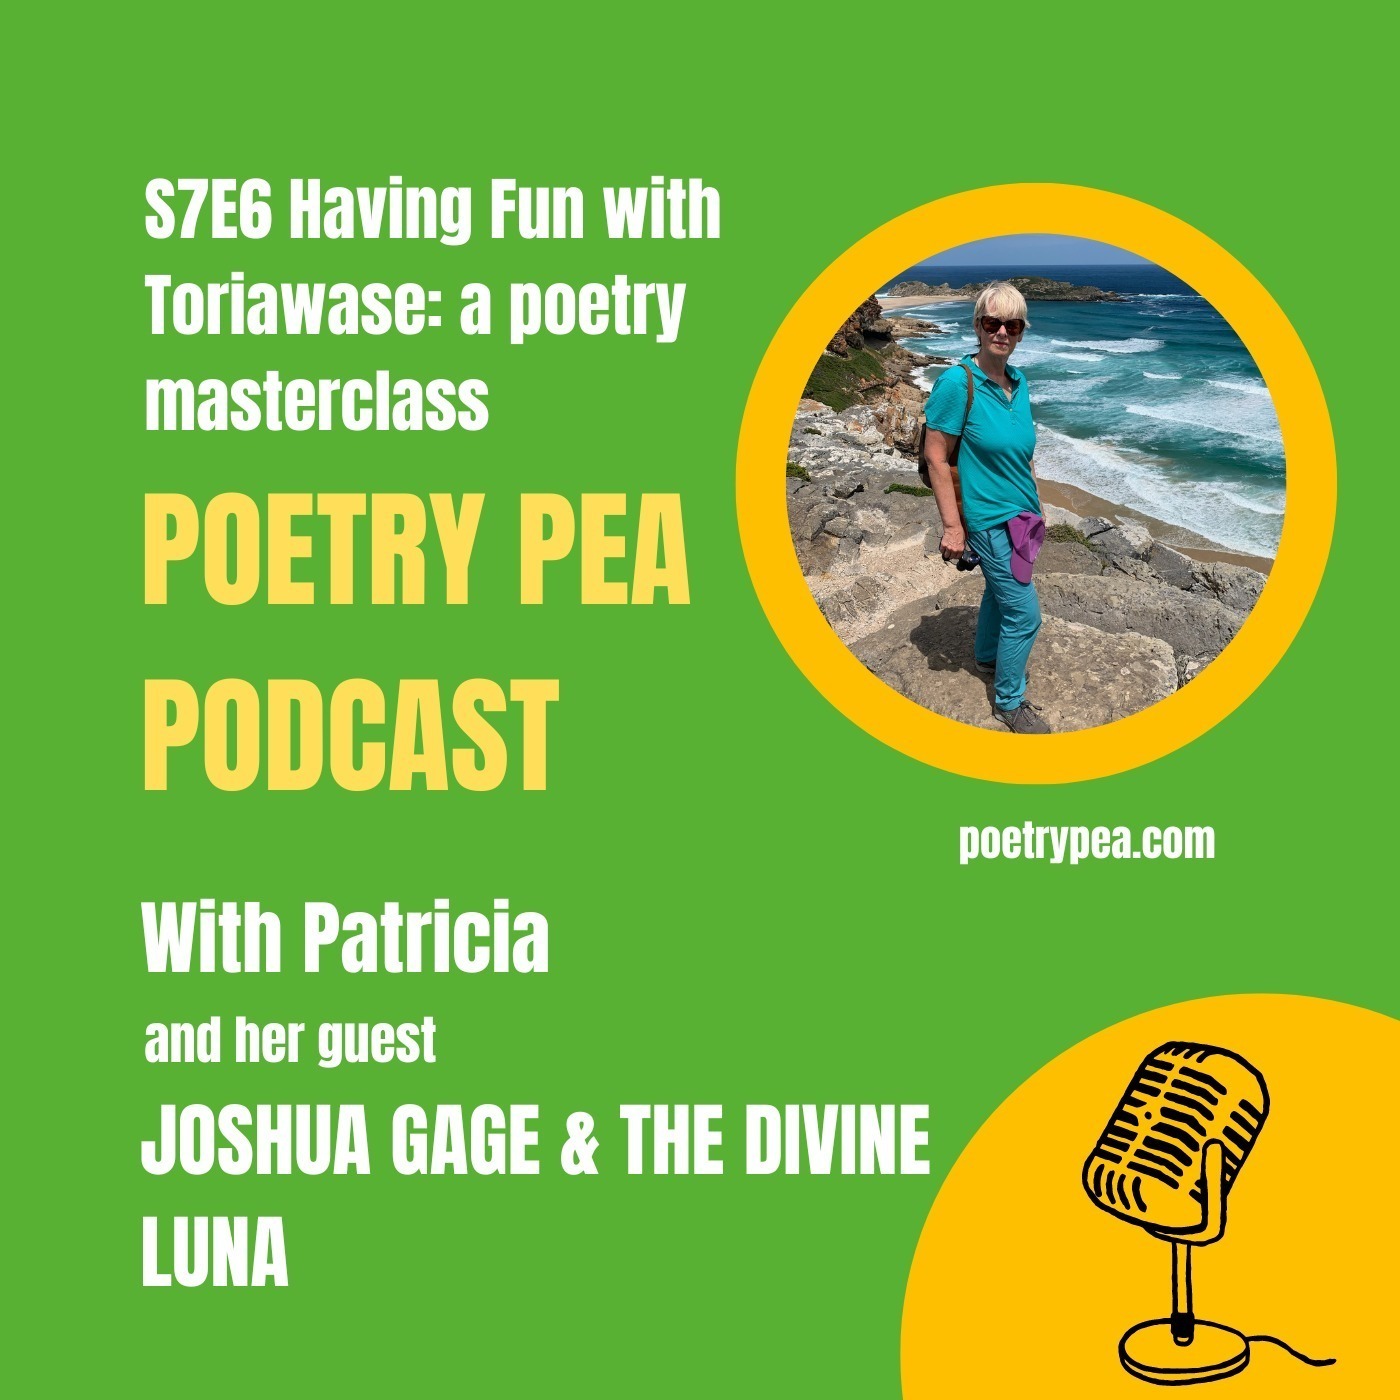 S7E6 Having fun with Toriawase, a poetry masterclass